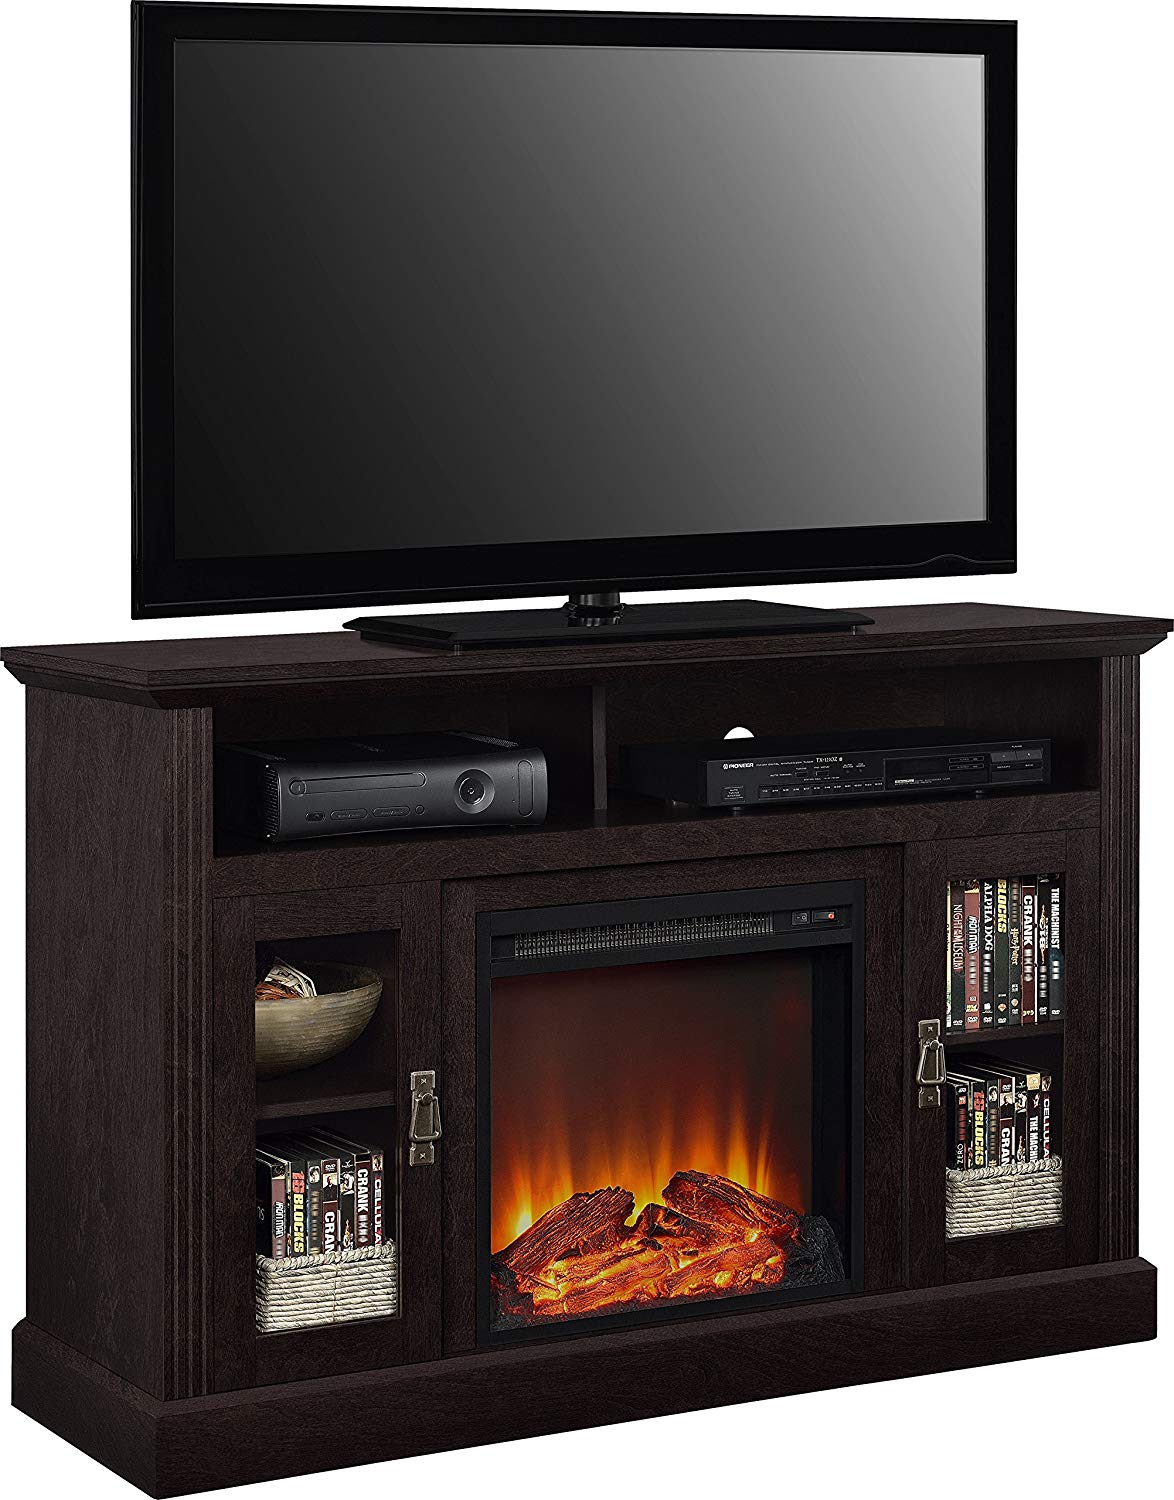 Wood Fireplace Inserts Lowes Elegant top 10 Best Lowes Electric Fireplace